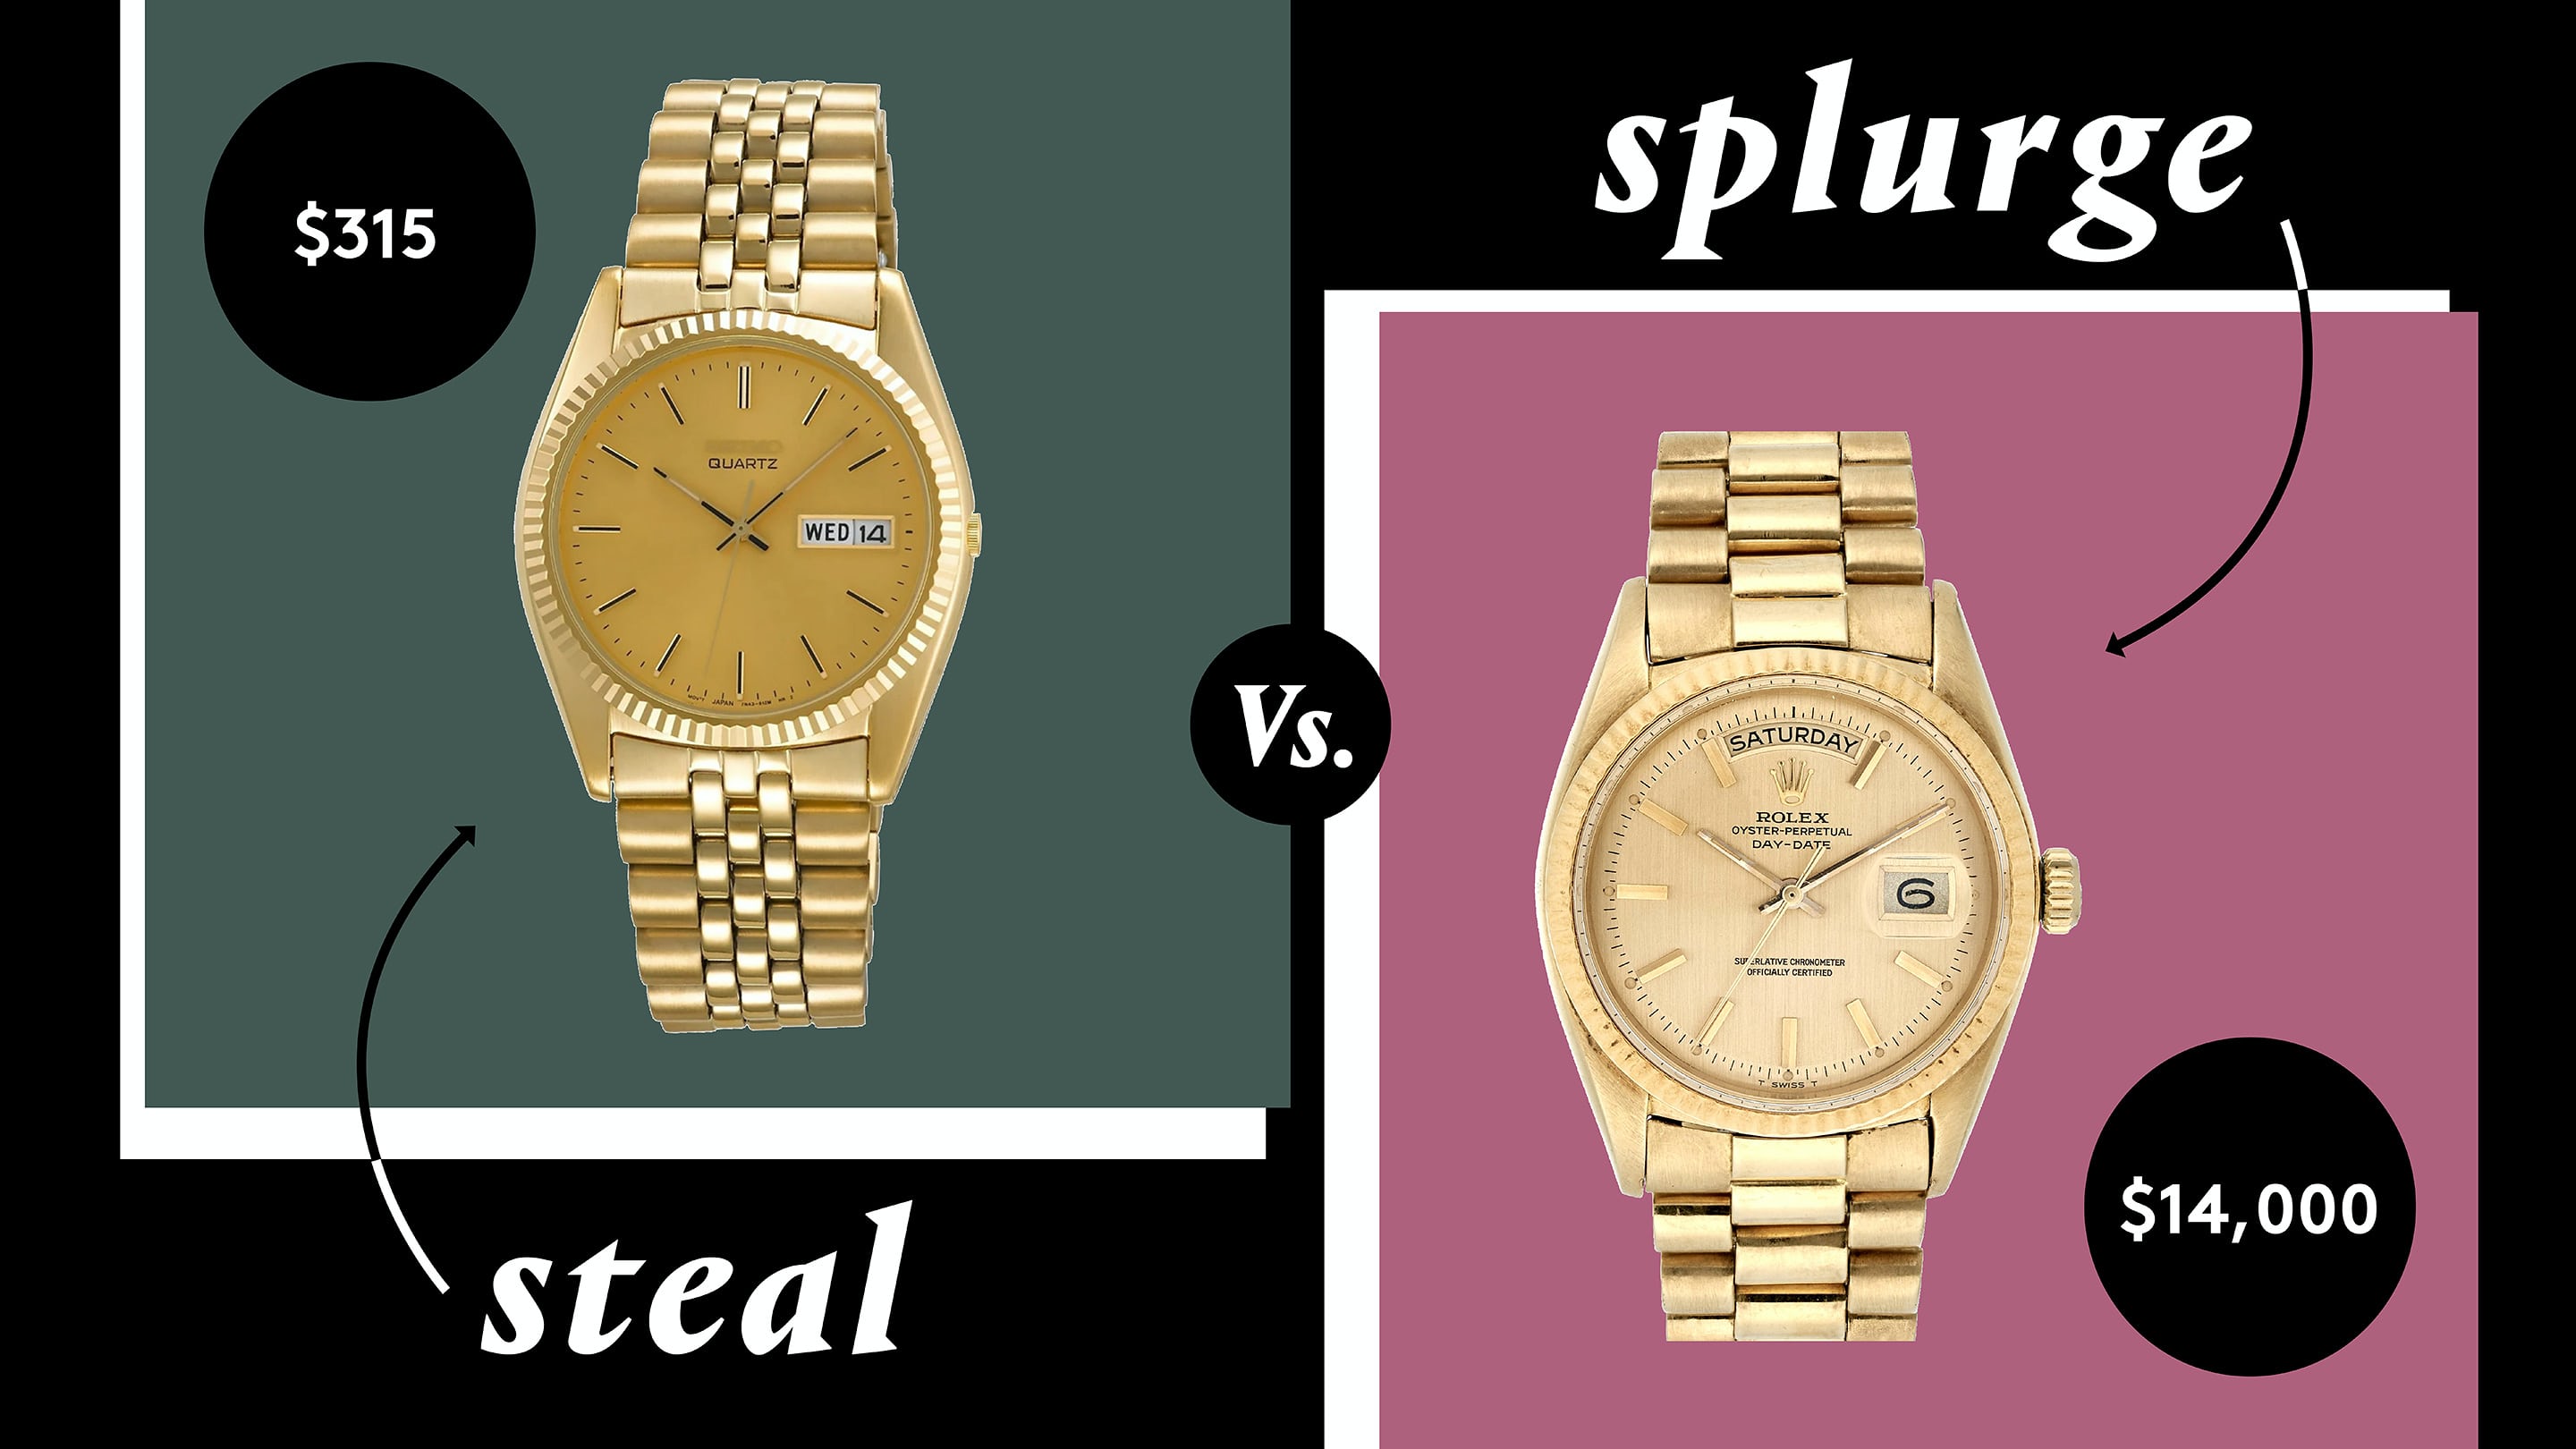 So, You Want Yellow-Gold Bracelet Comparing Rolex vs. Seiko - Bloomberg